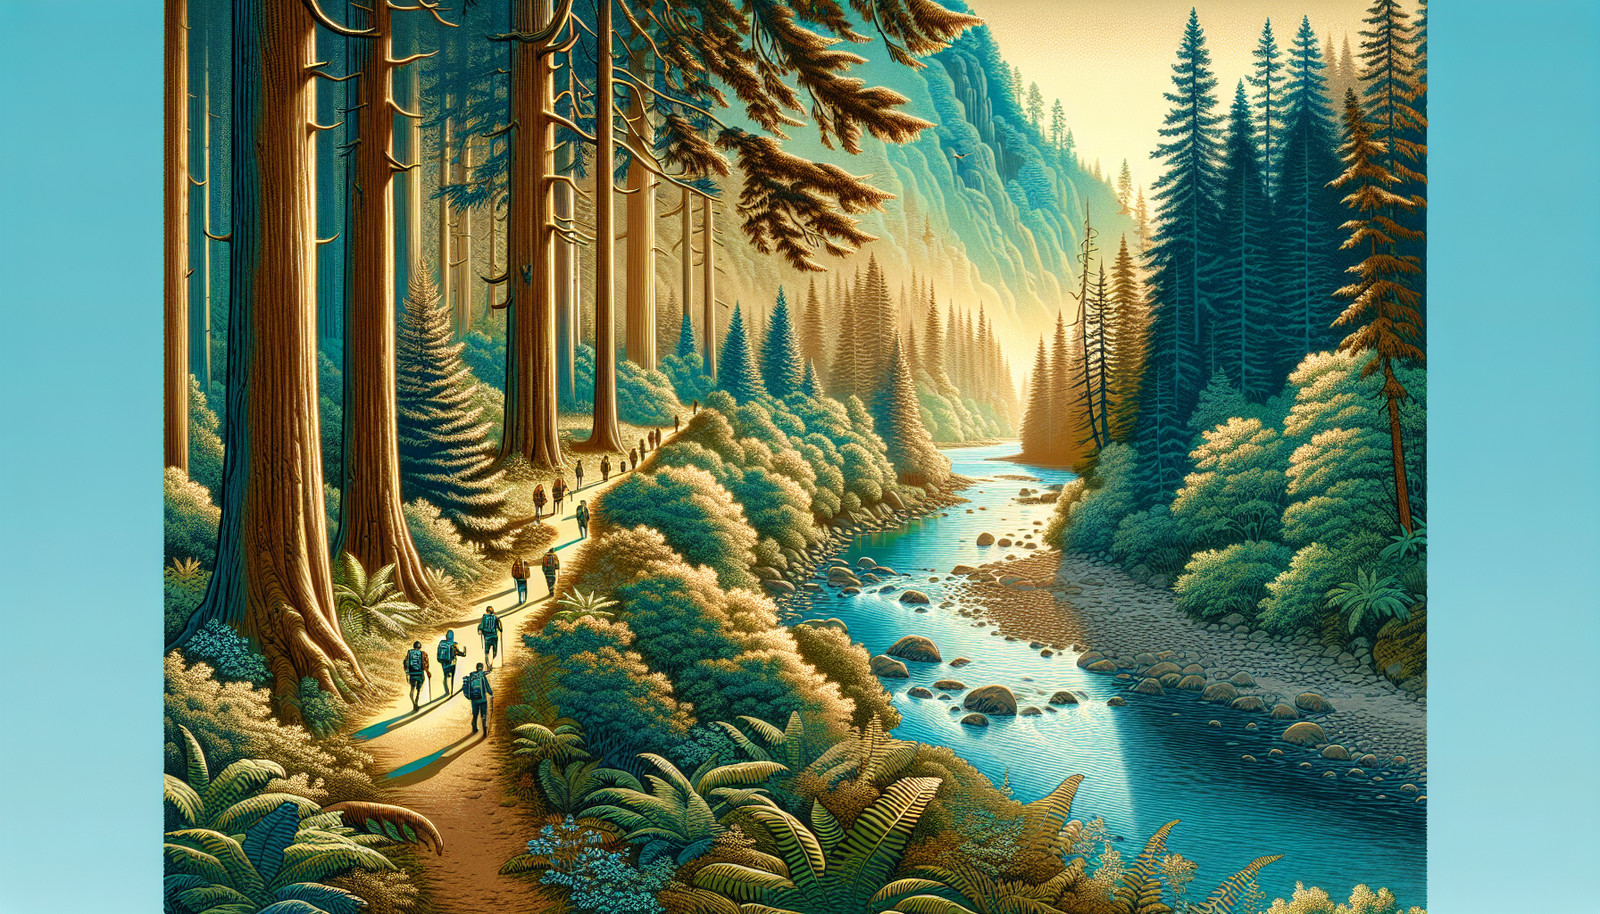 Illustration of Cowichan River Provincial Park's scenic hiking trails